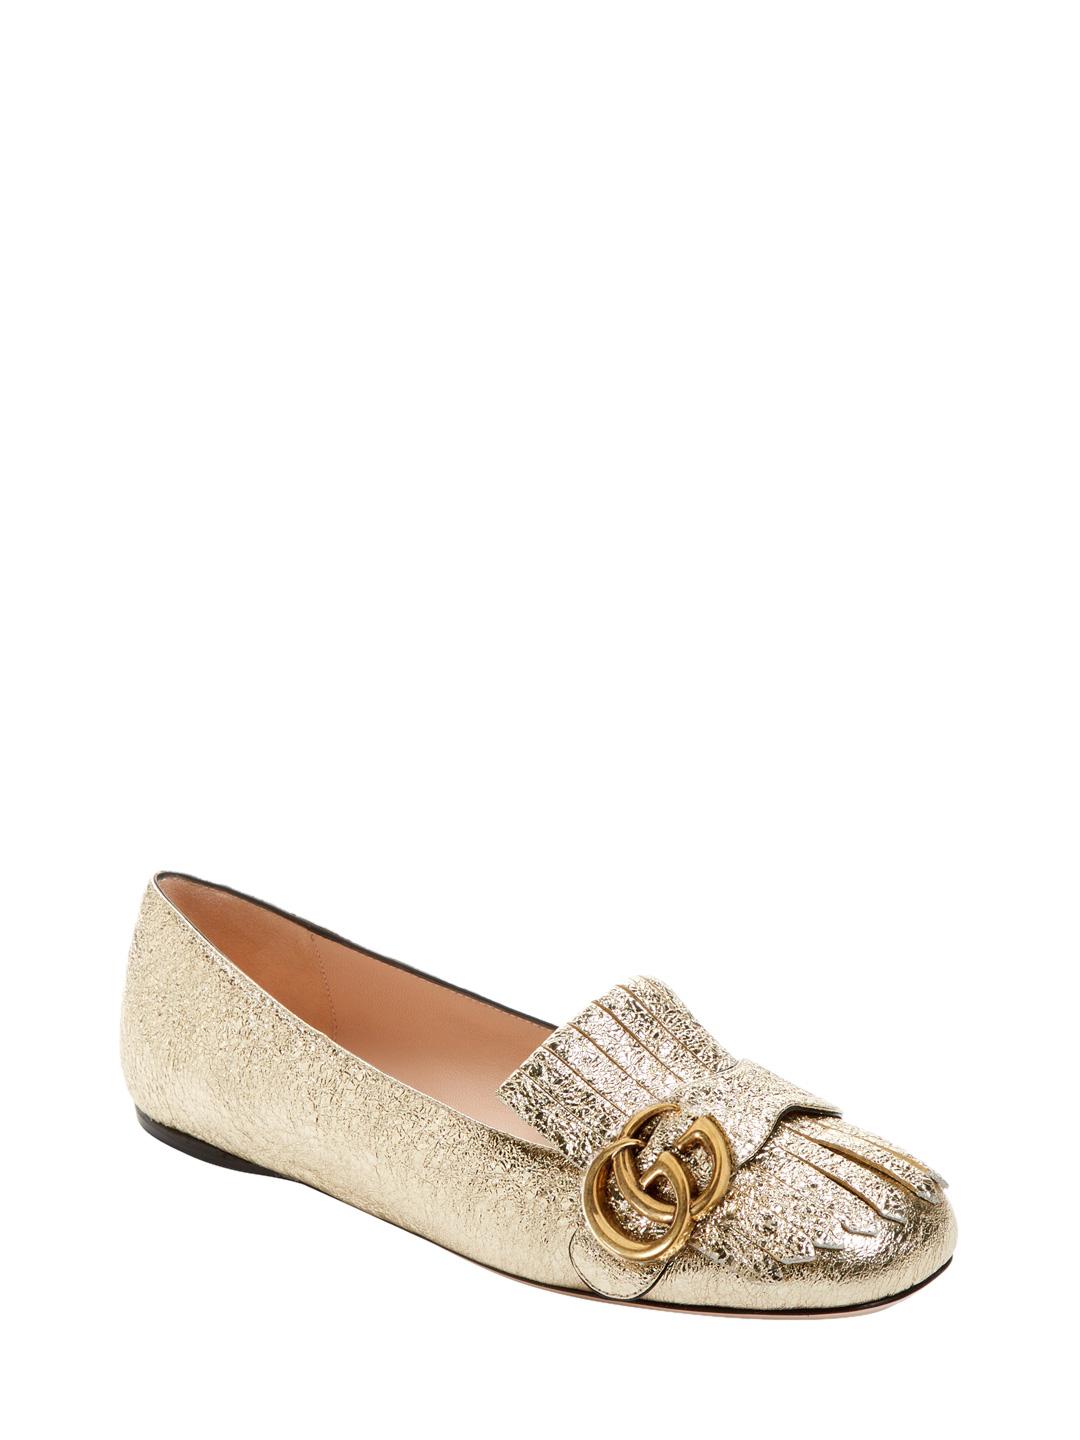 Gucci Leather Marmont Ballerina Flat in 